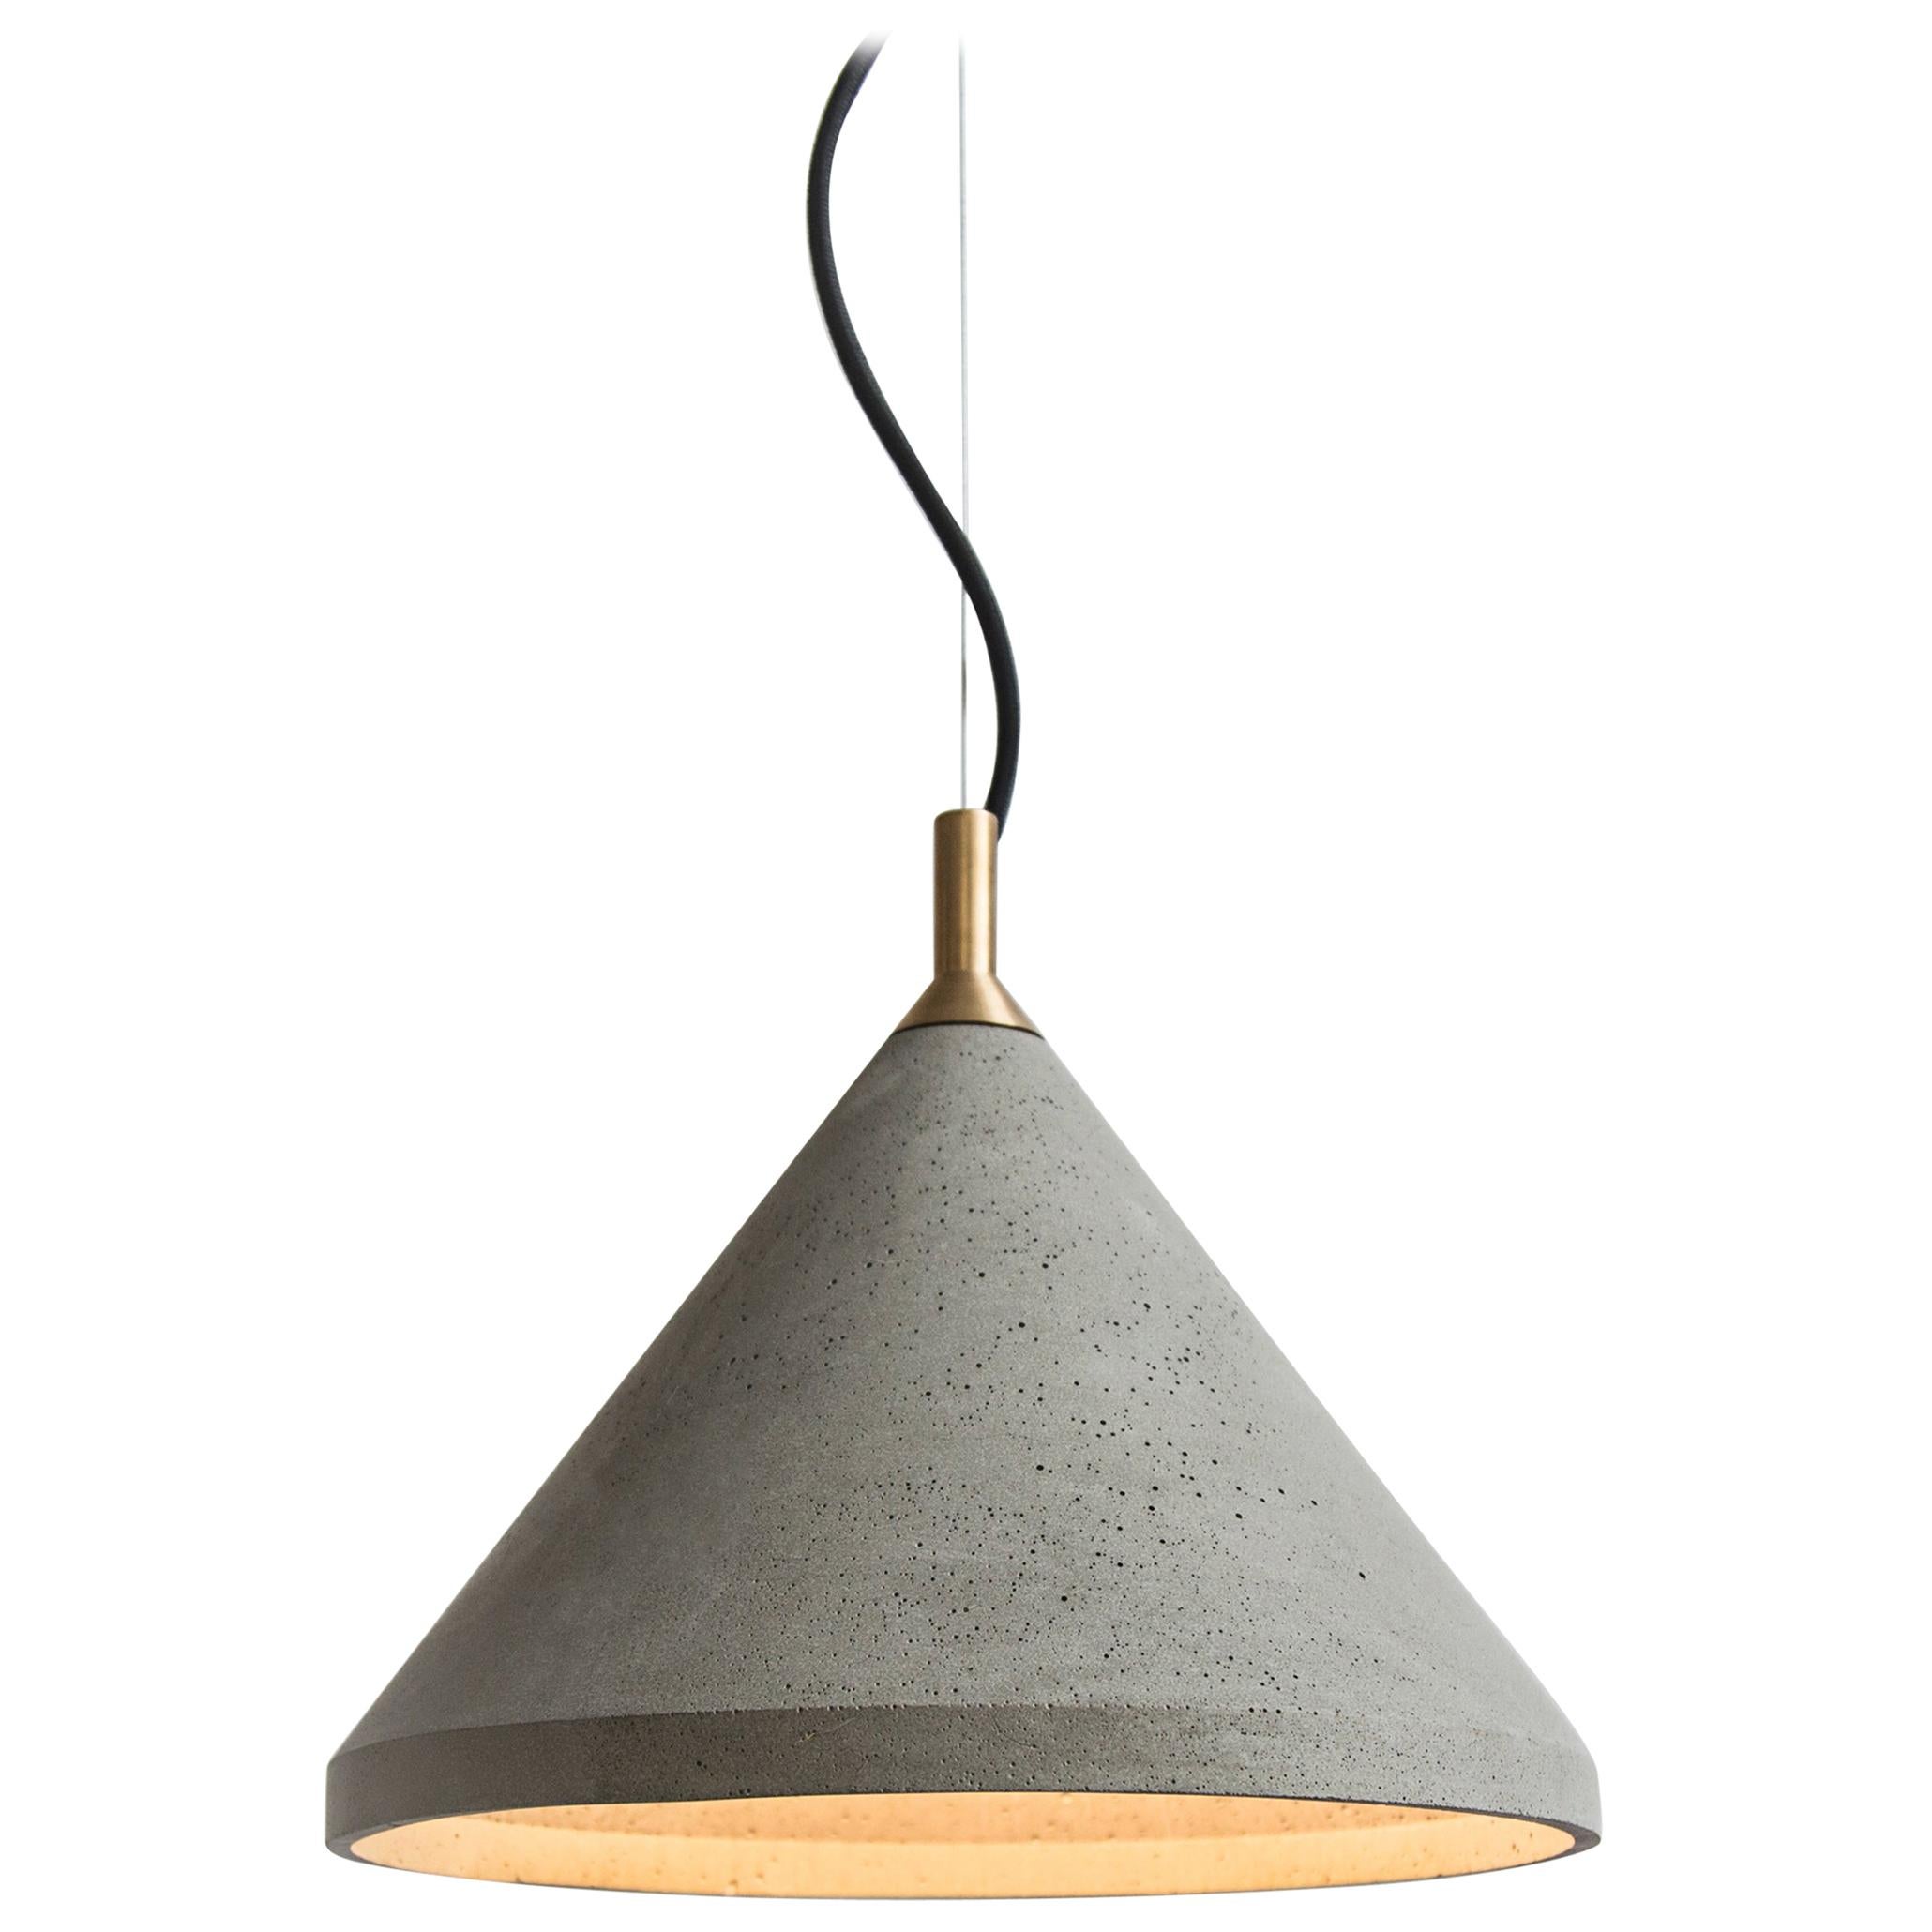 Concrete and Brass Pendant Lamp, “Ren, ” M, from Concrete Collection by Bentu